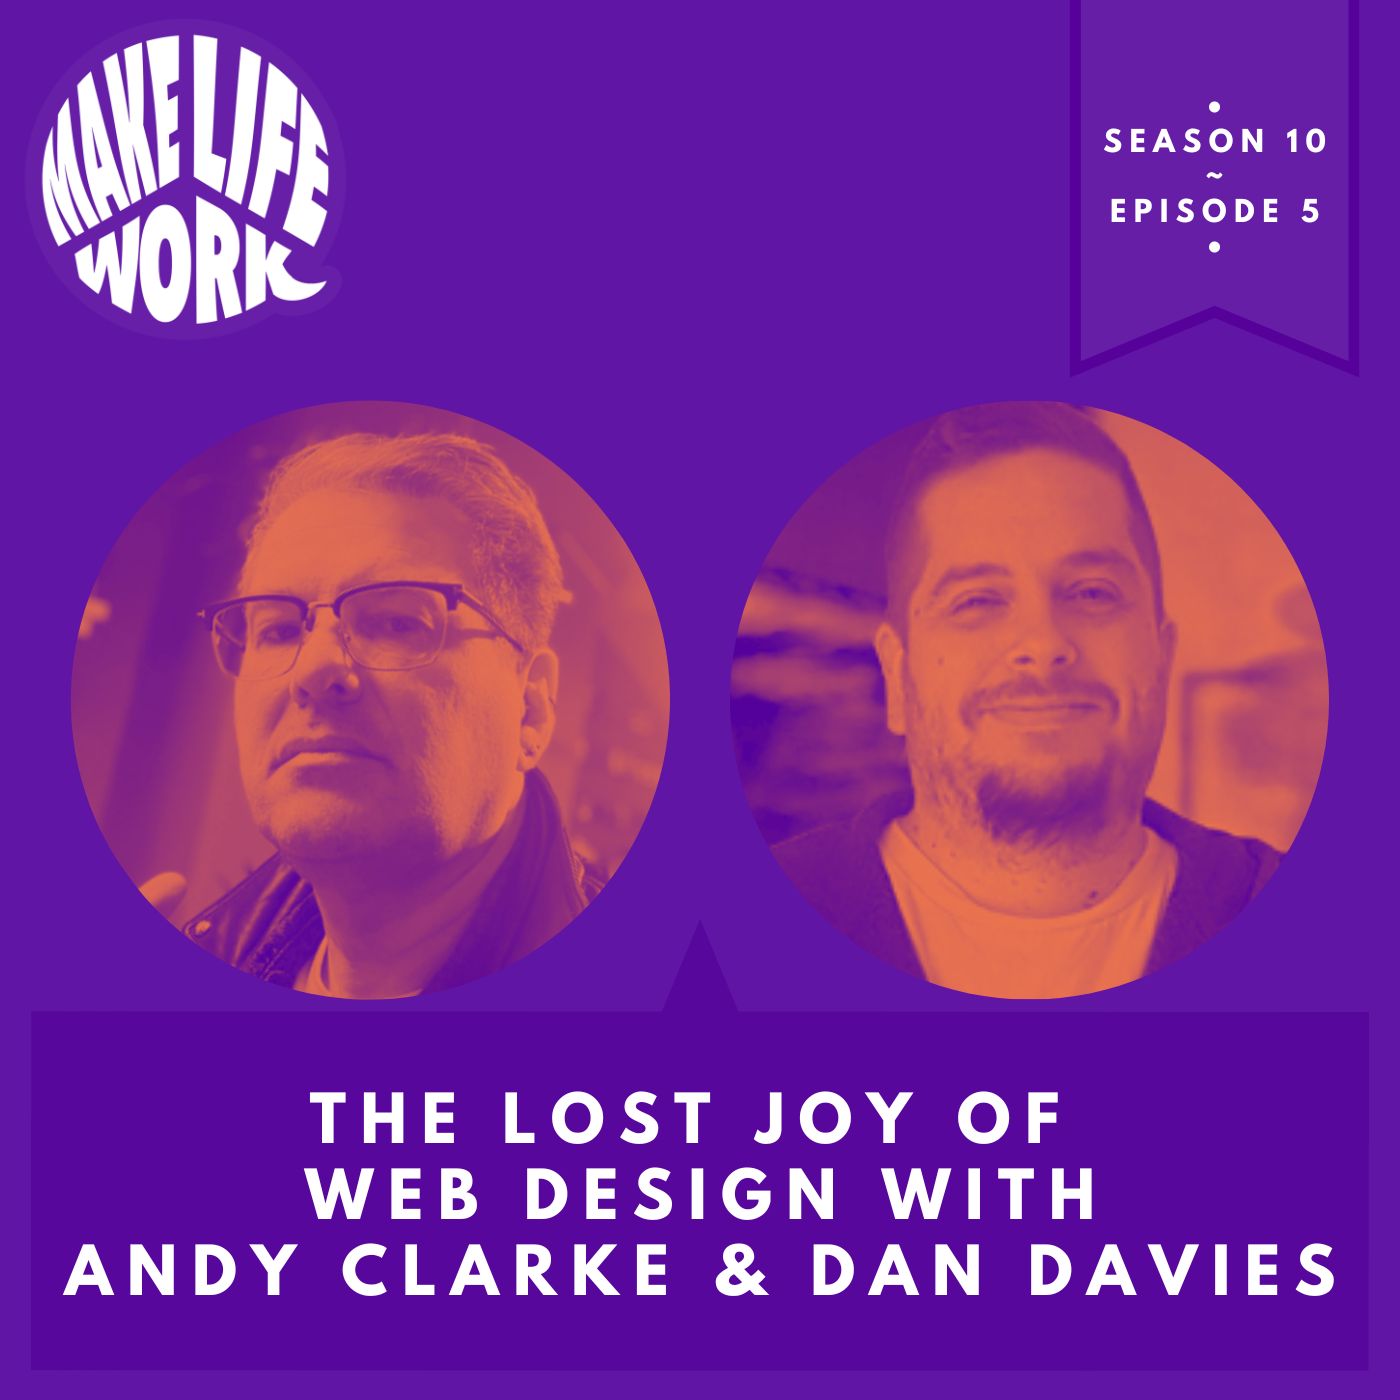 The lost joy of web design with Andy Clarke & Dan Davies